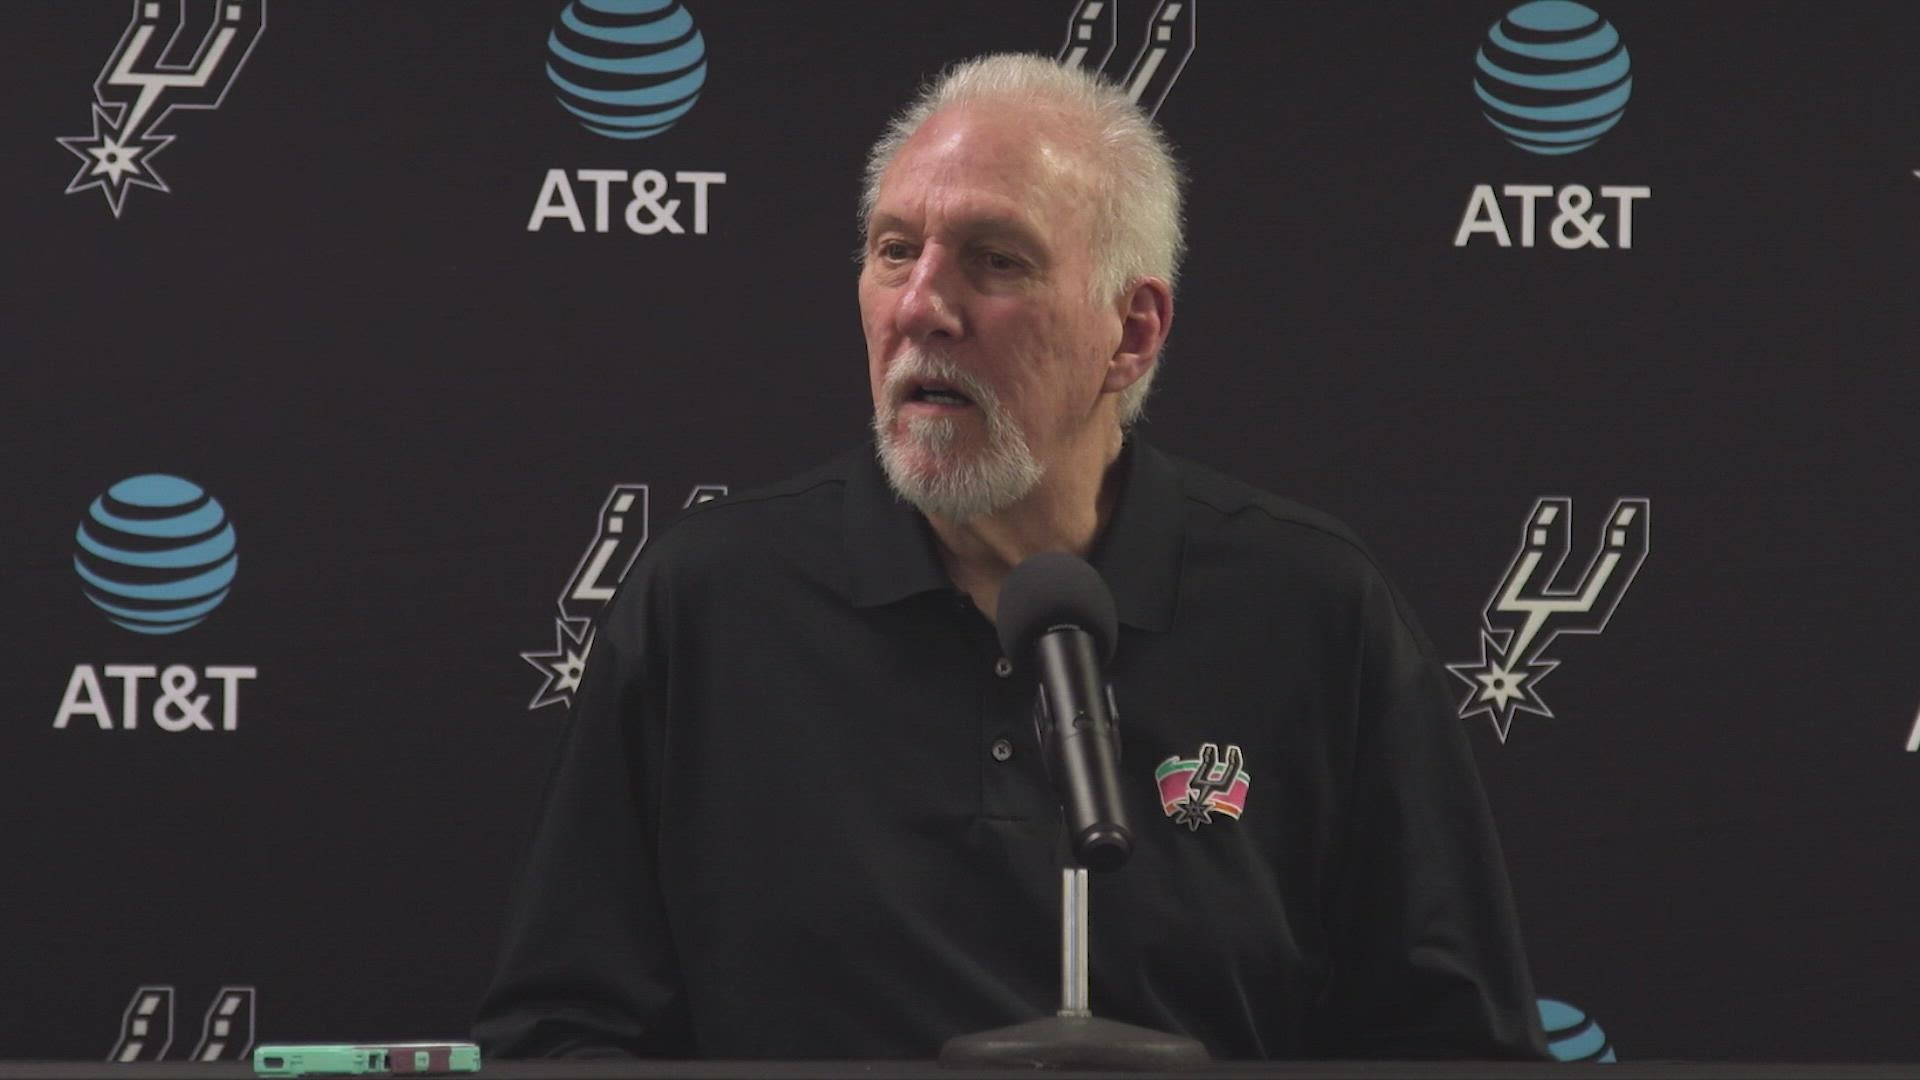 Popovich called Billups "a tough nut" before the Spurs took on the Blazers.